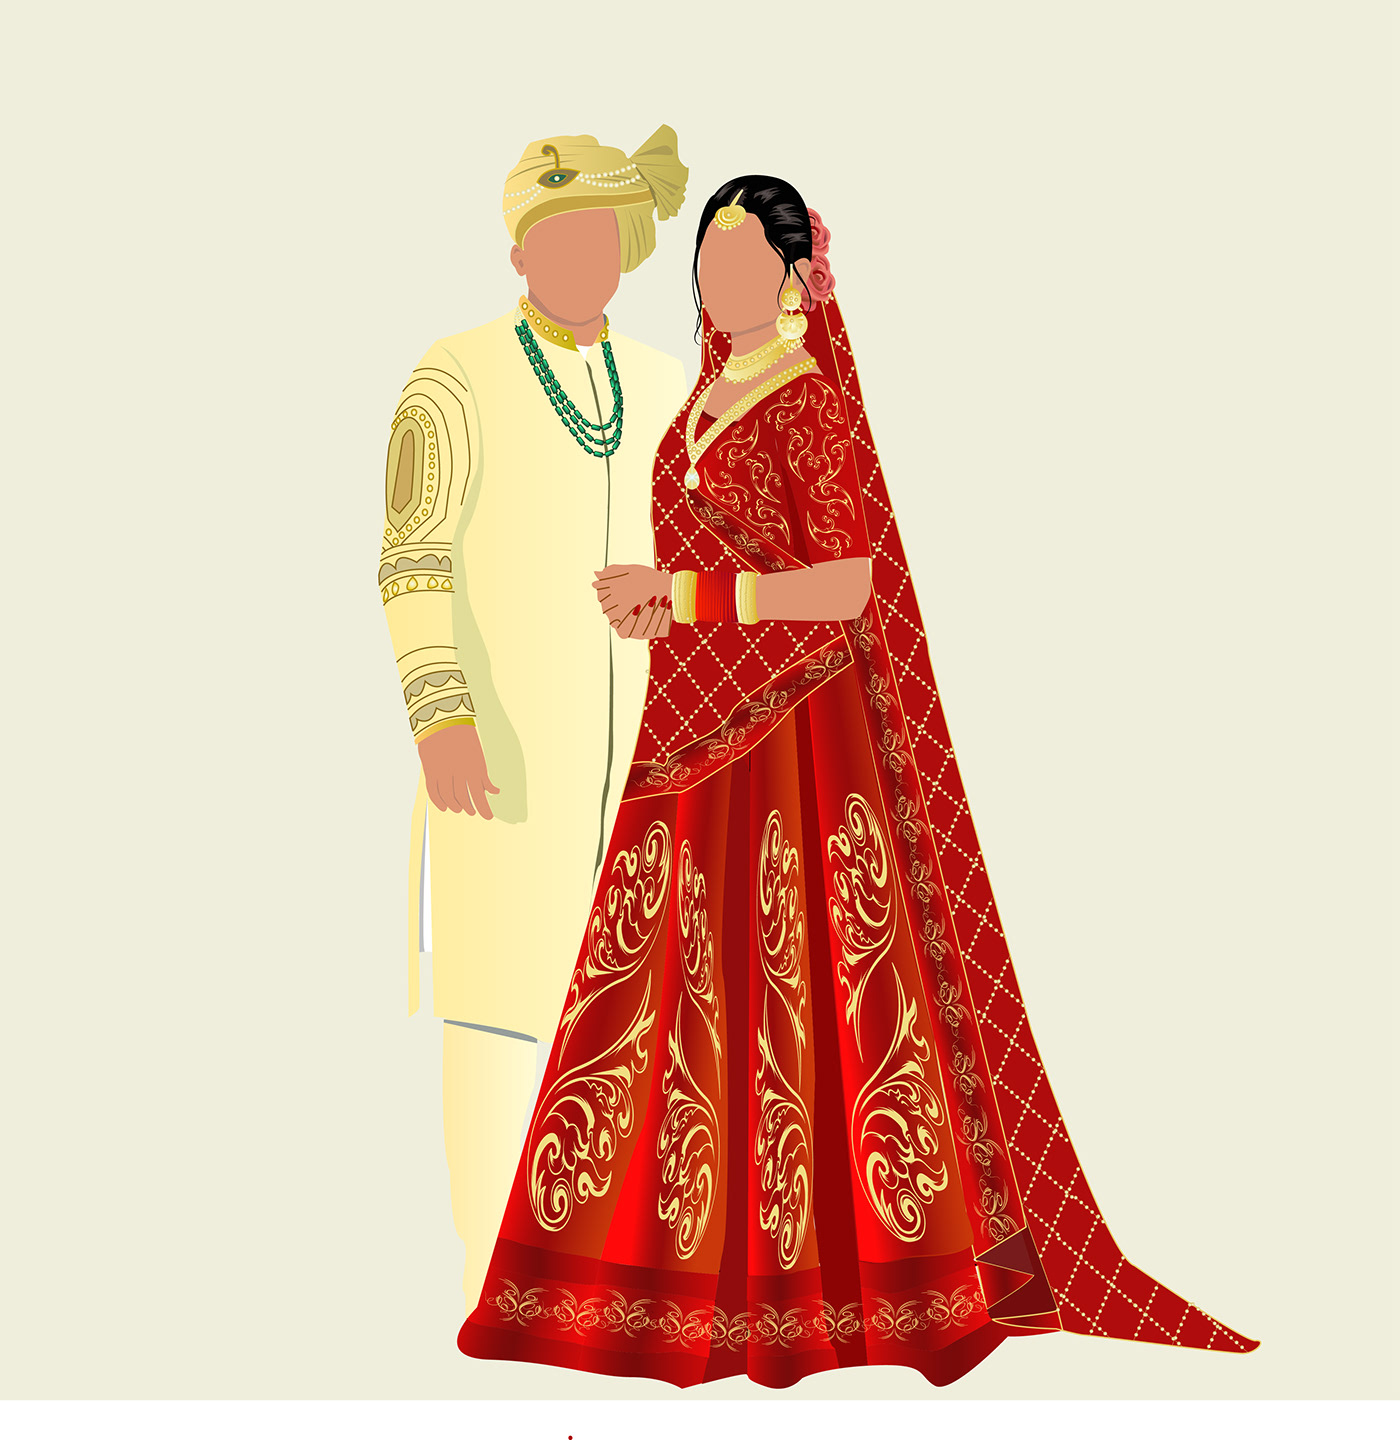 Illustration for wedding cards and invitations